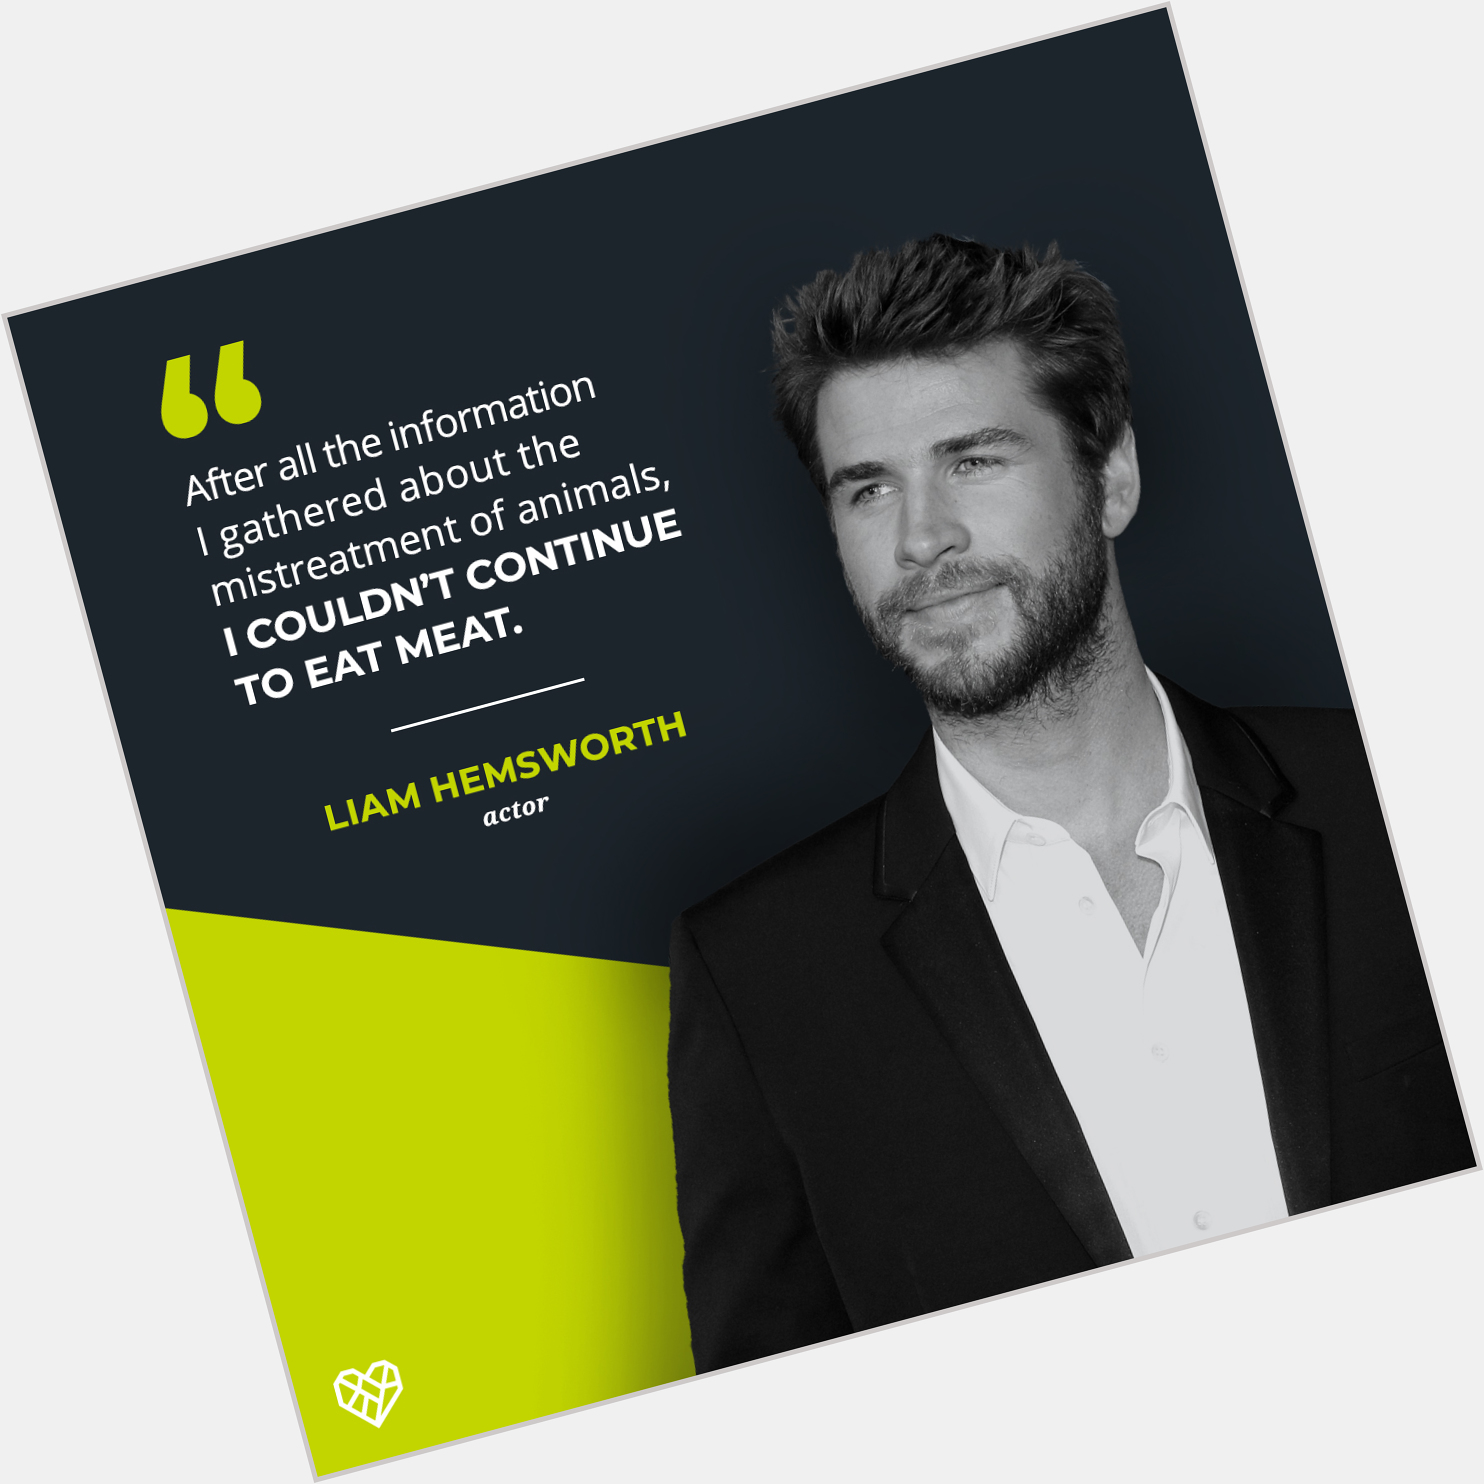 Happy Birthday, Liam Hemsworth! Thank you for speaking out       